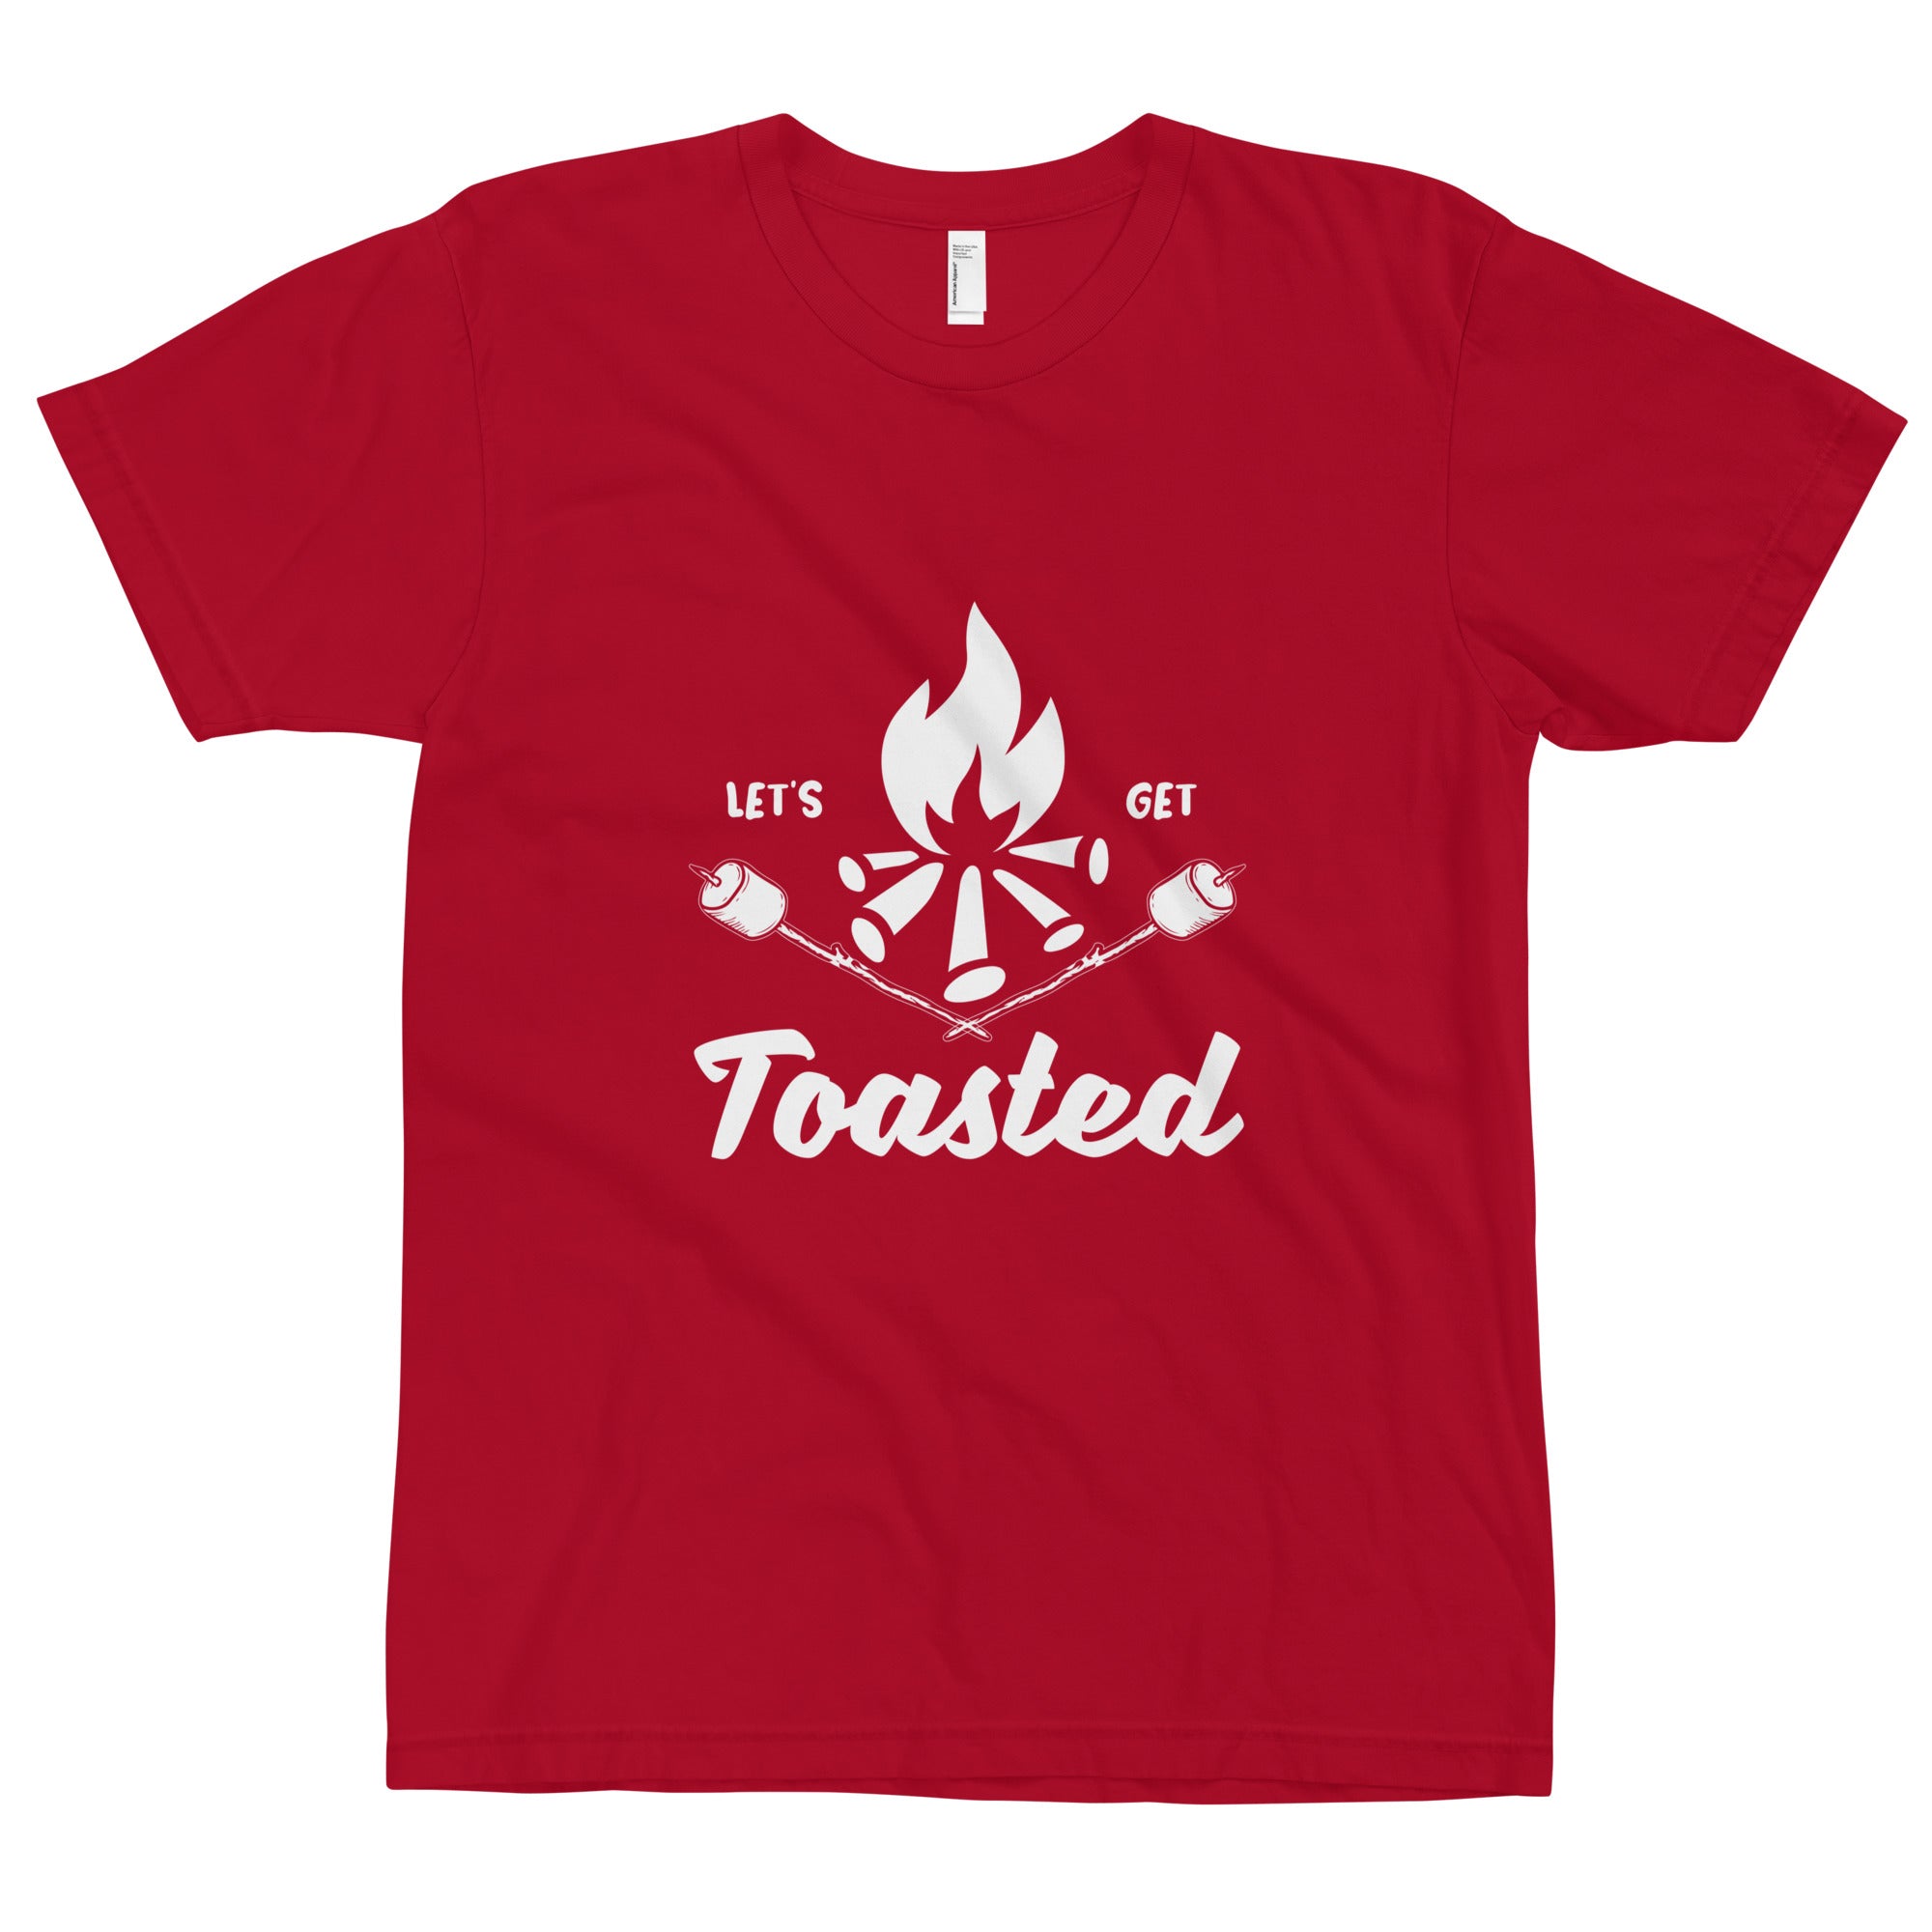 Let's Get Toasted Unisex T-Shirt